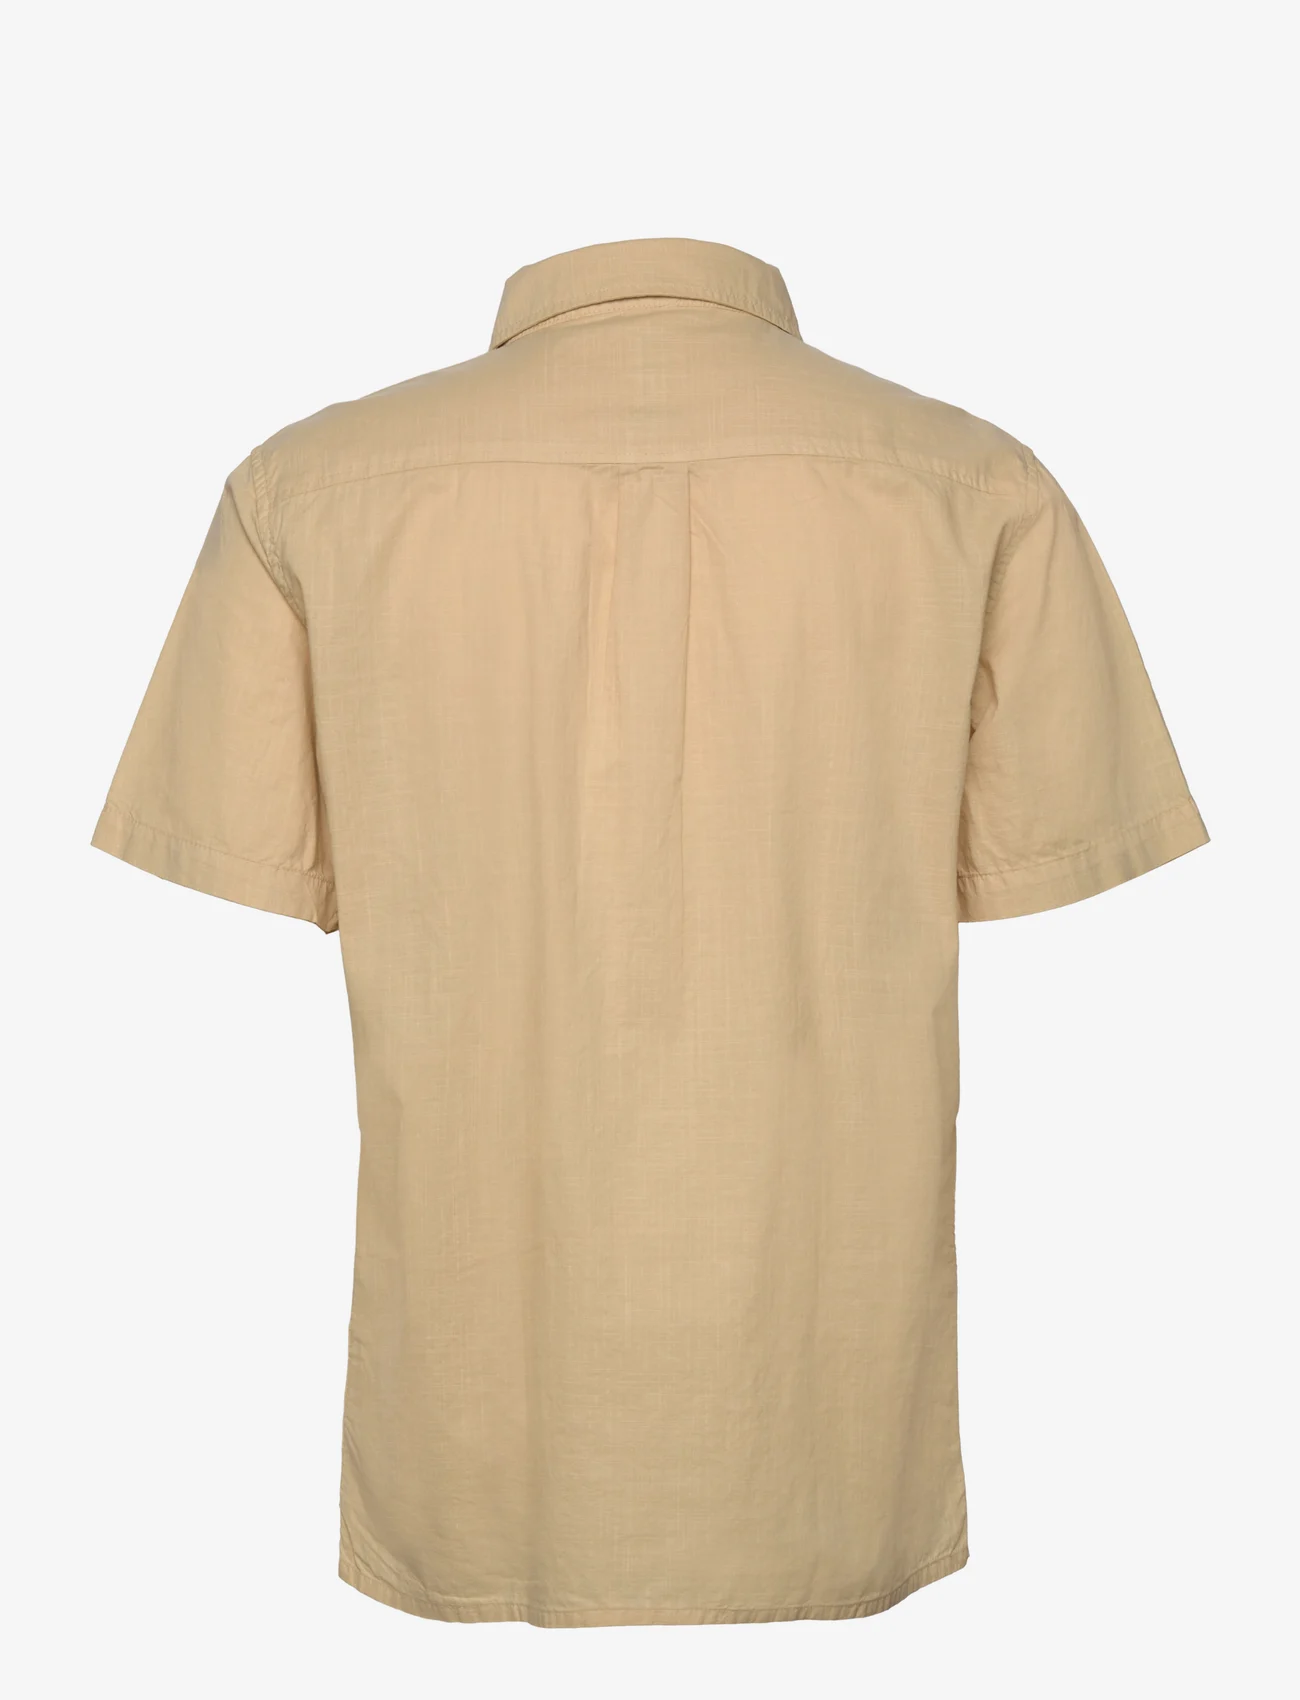 Quiksilver - BOLAM SS - short-sleeved polos - wheat - 1